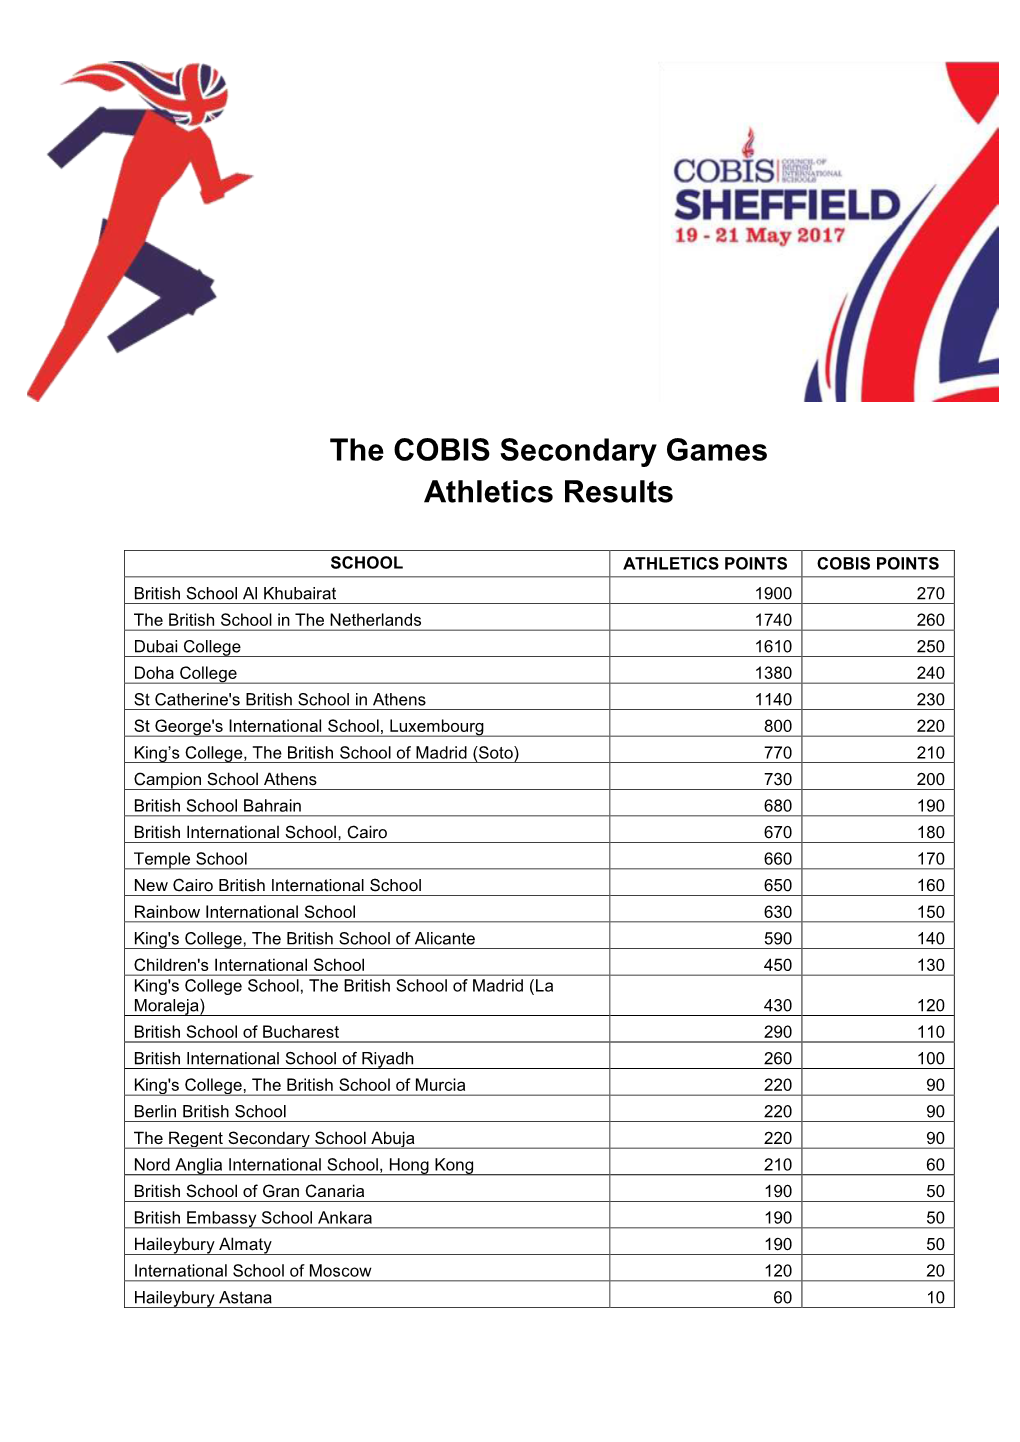 The COBIS Secondary Games Athletics Results